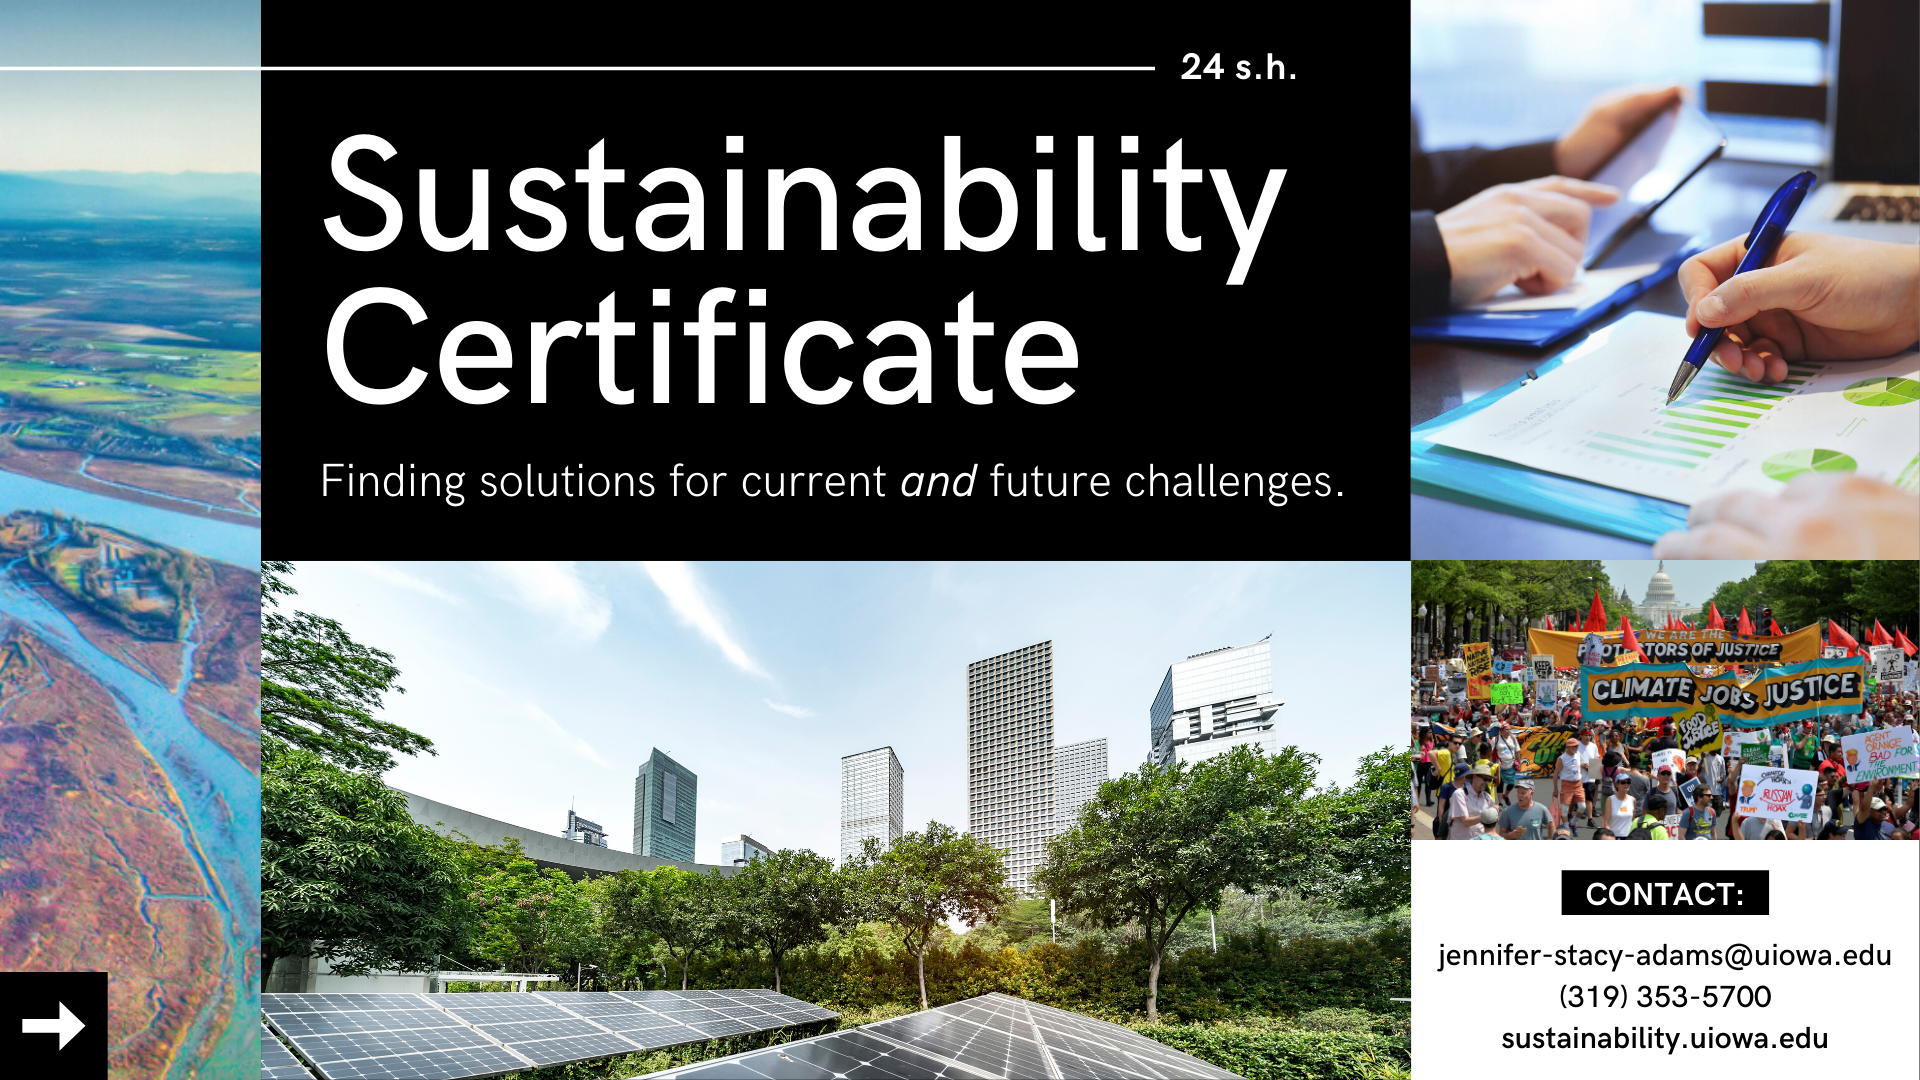 Sustainability Certificate: Finding solutions for current and future challenges